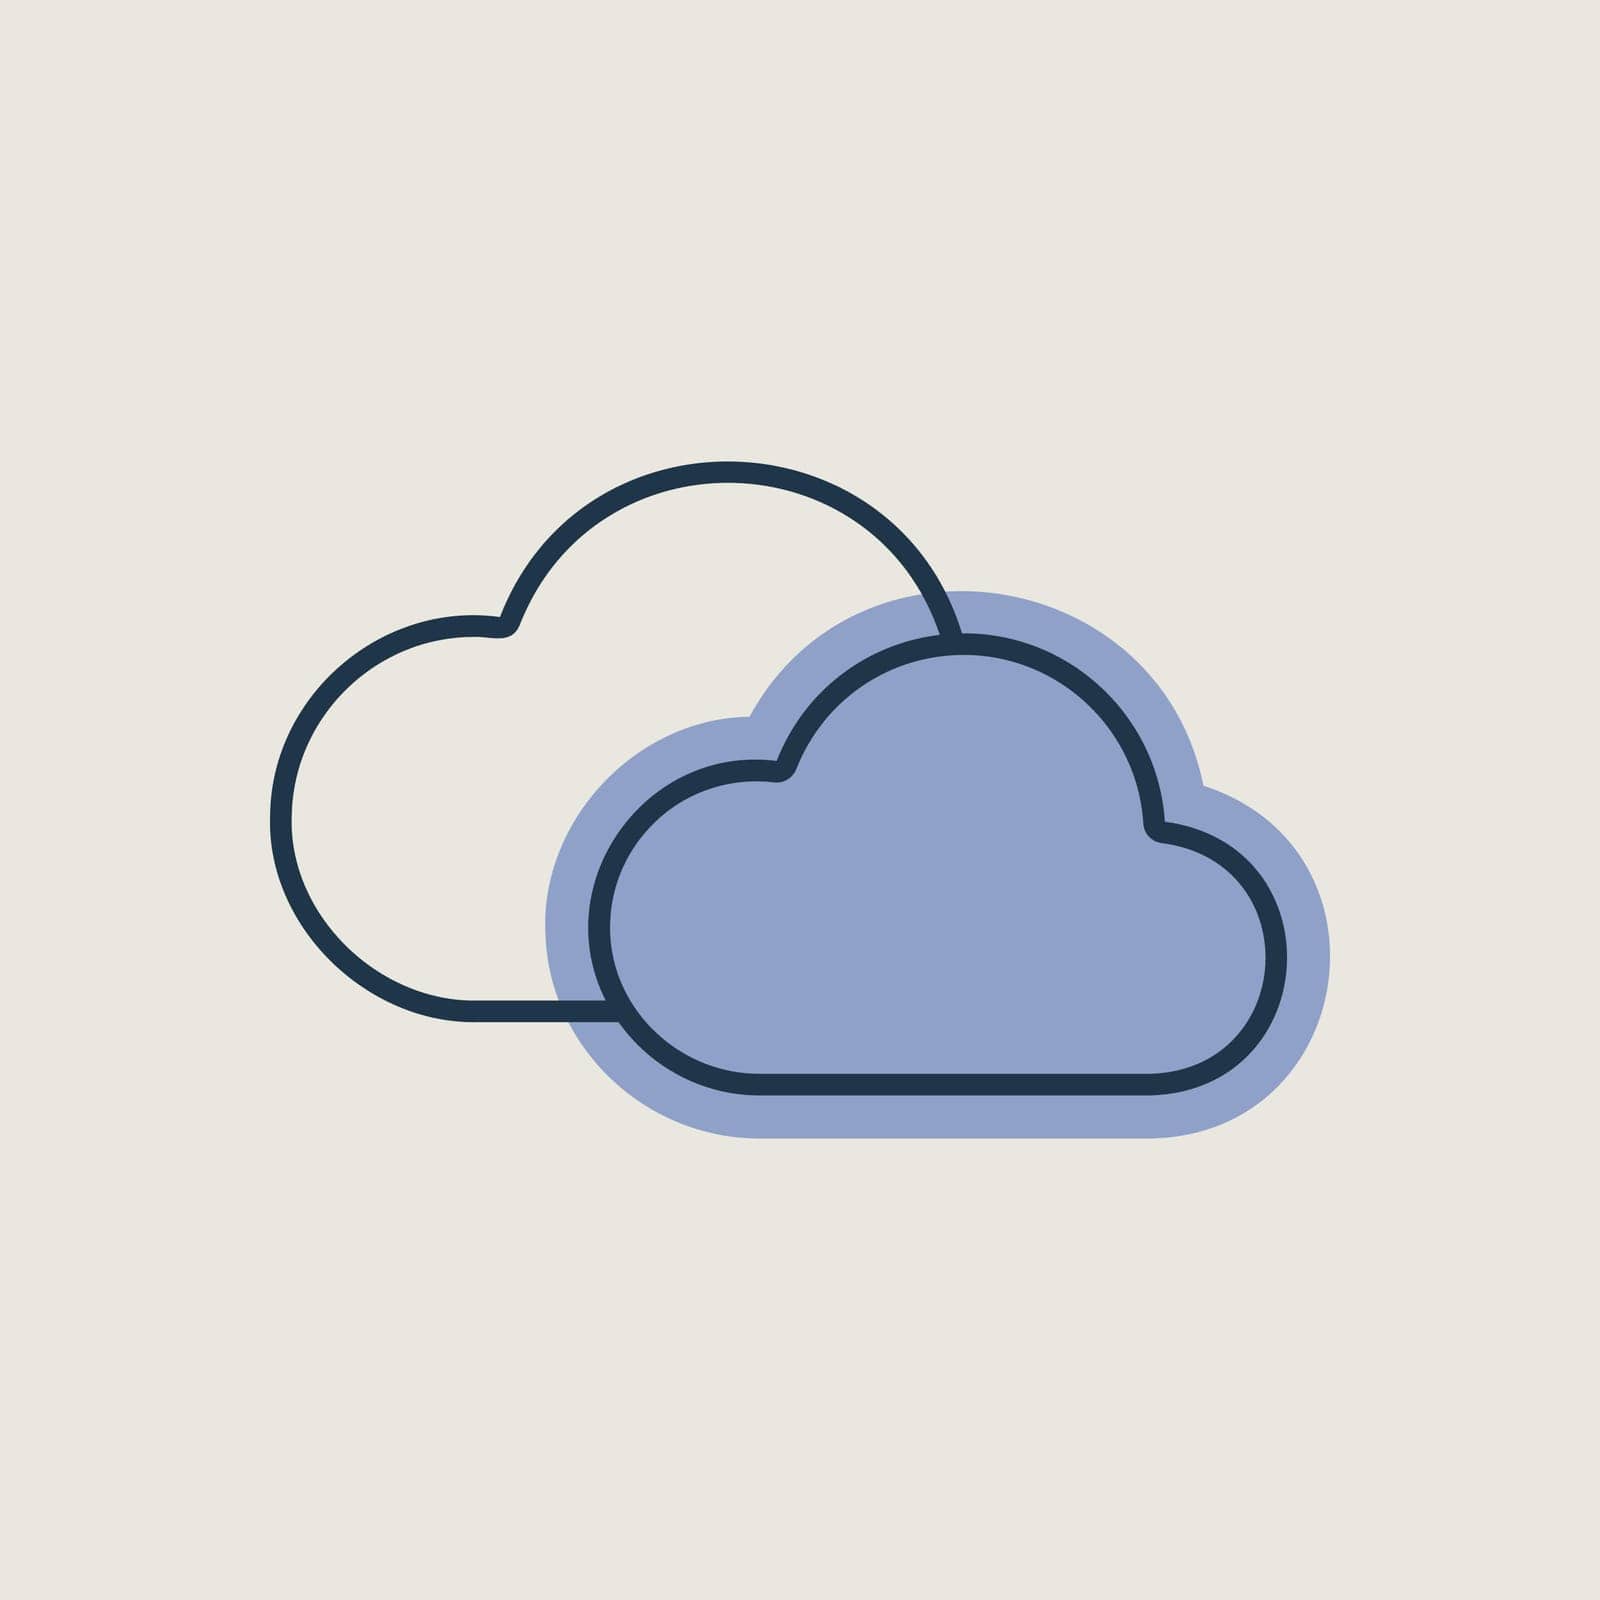 Two clouds vector icon. Meteorology sign. Graph symbol for travel, tourism and weather web site and apps design, logo, app, UI